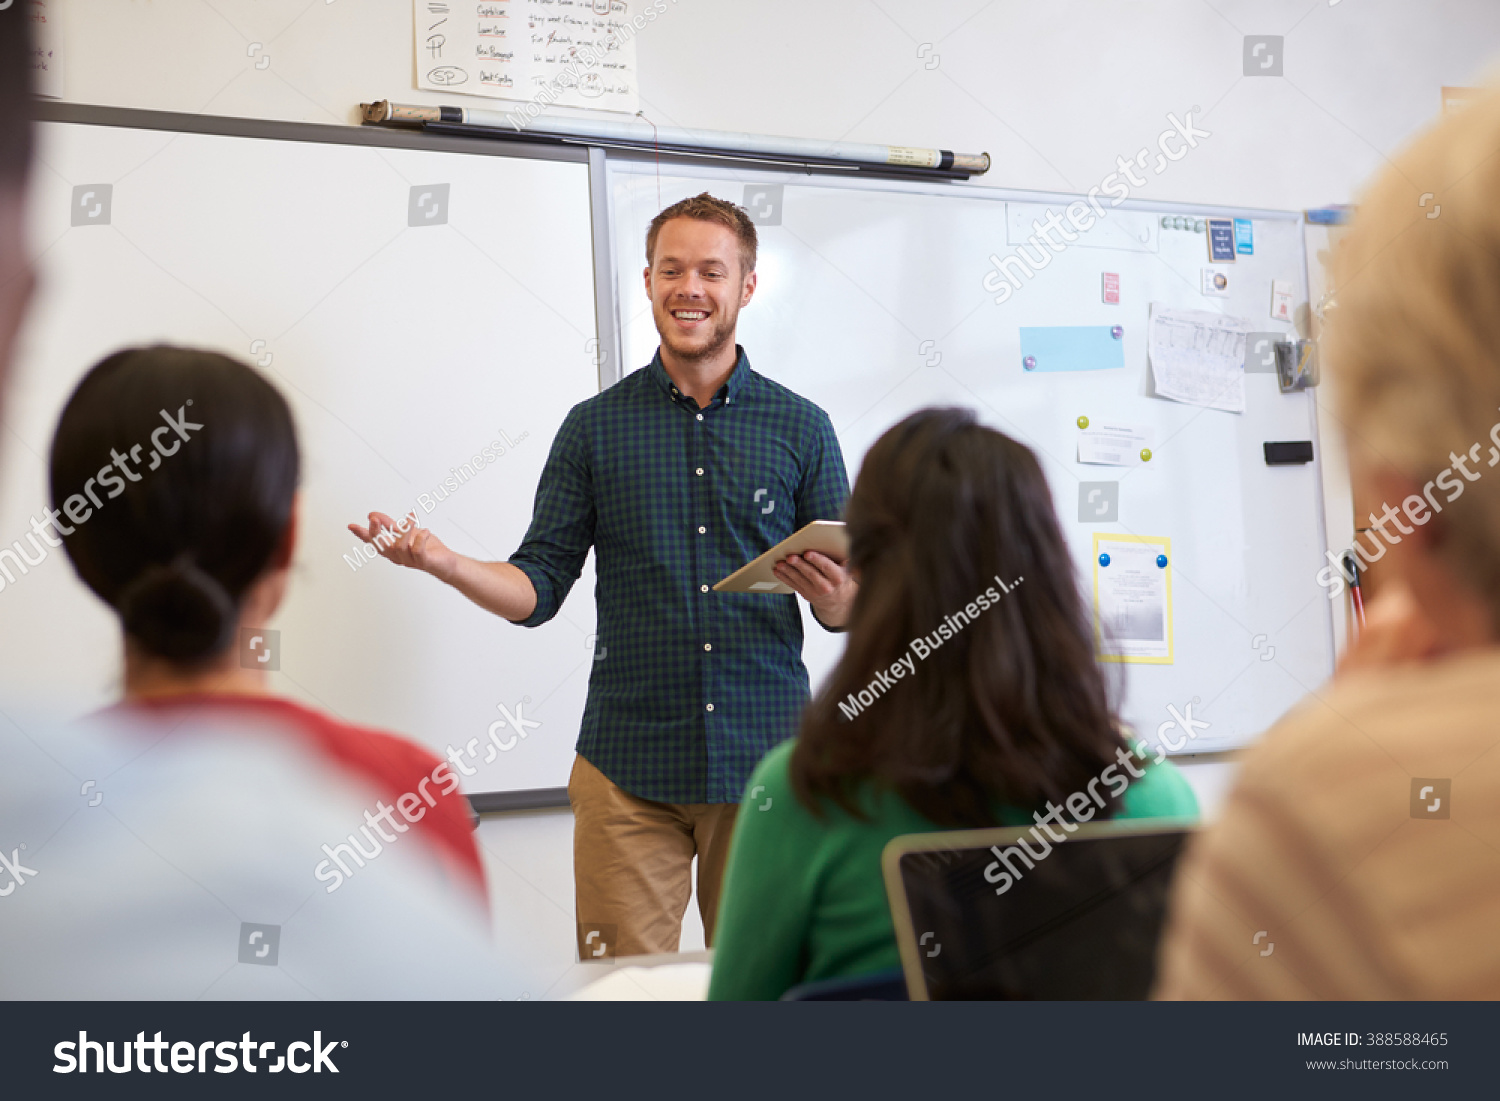 Male teacher listening to students at adult education class #388588465